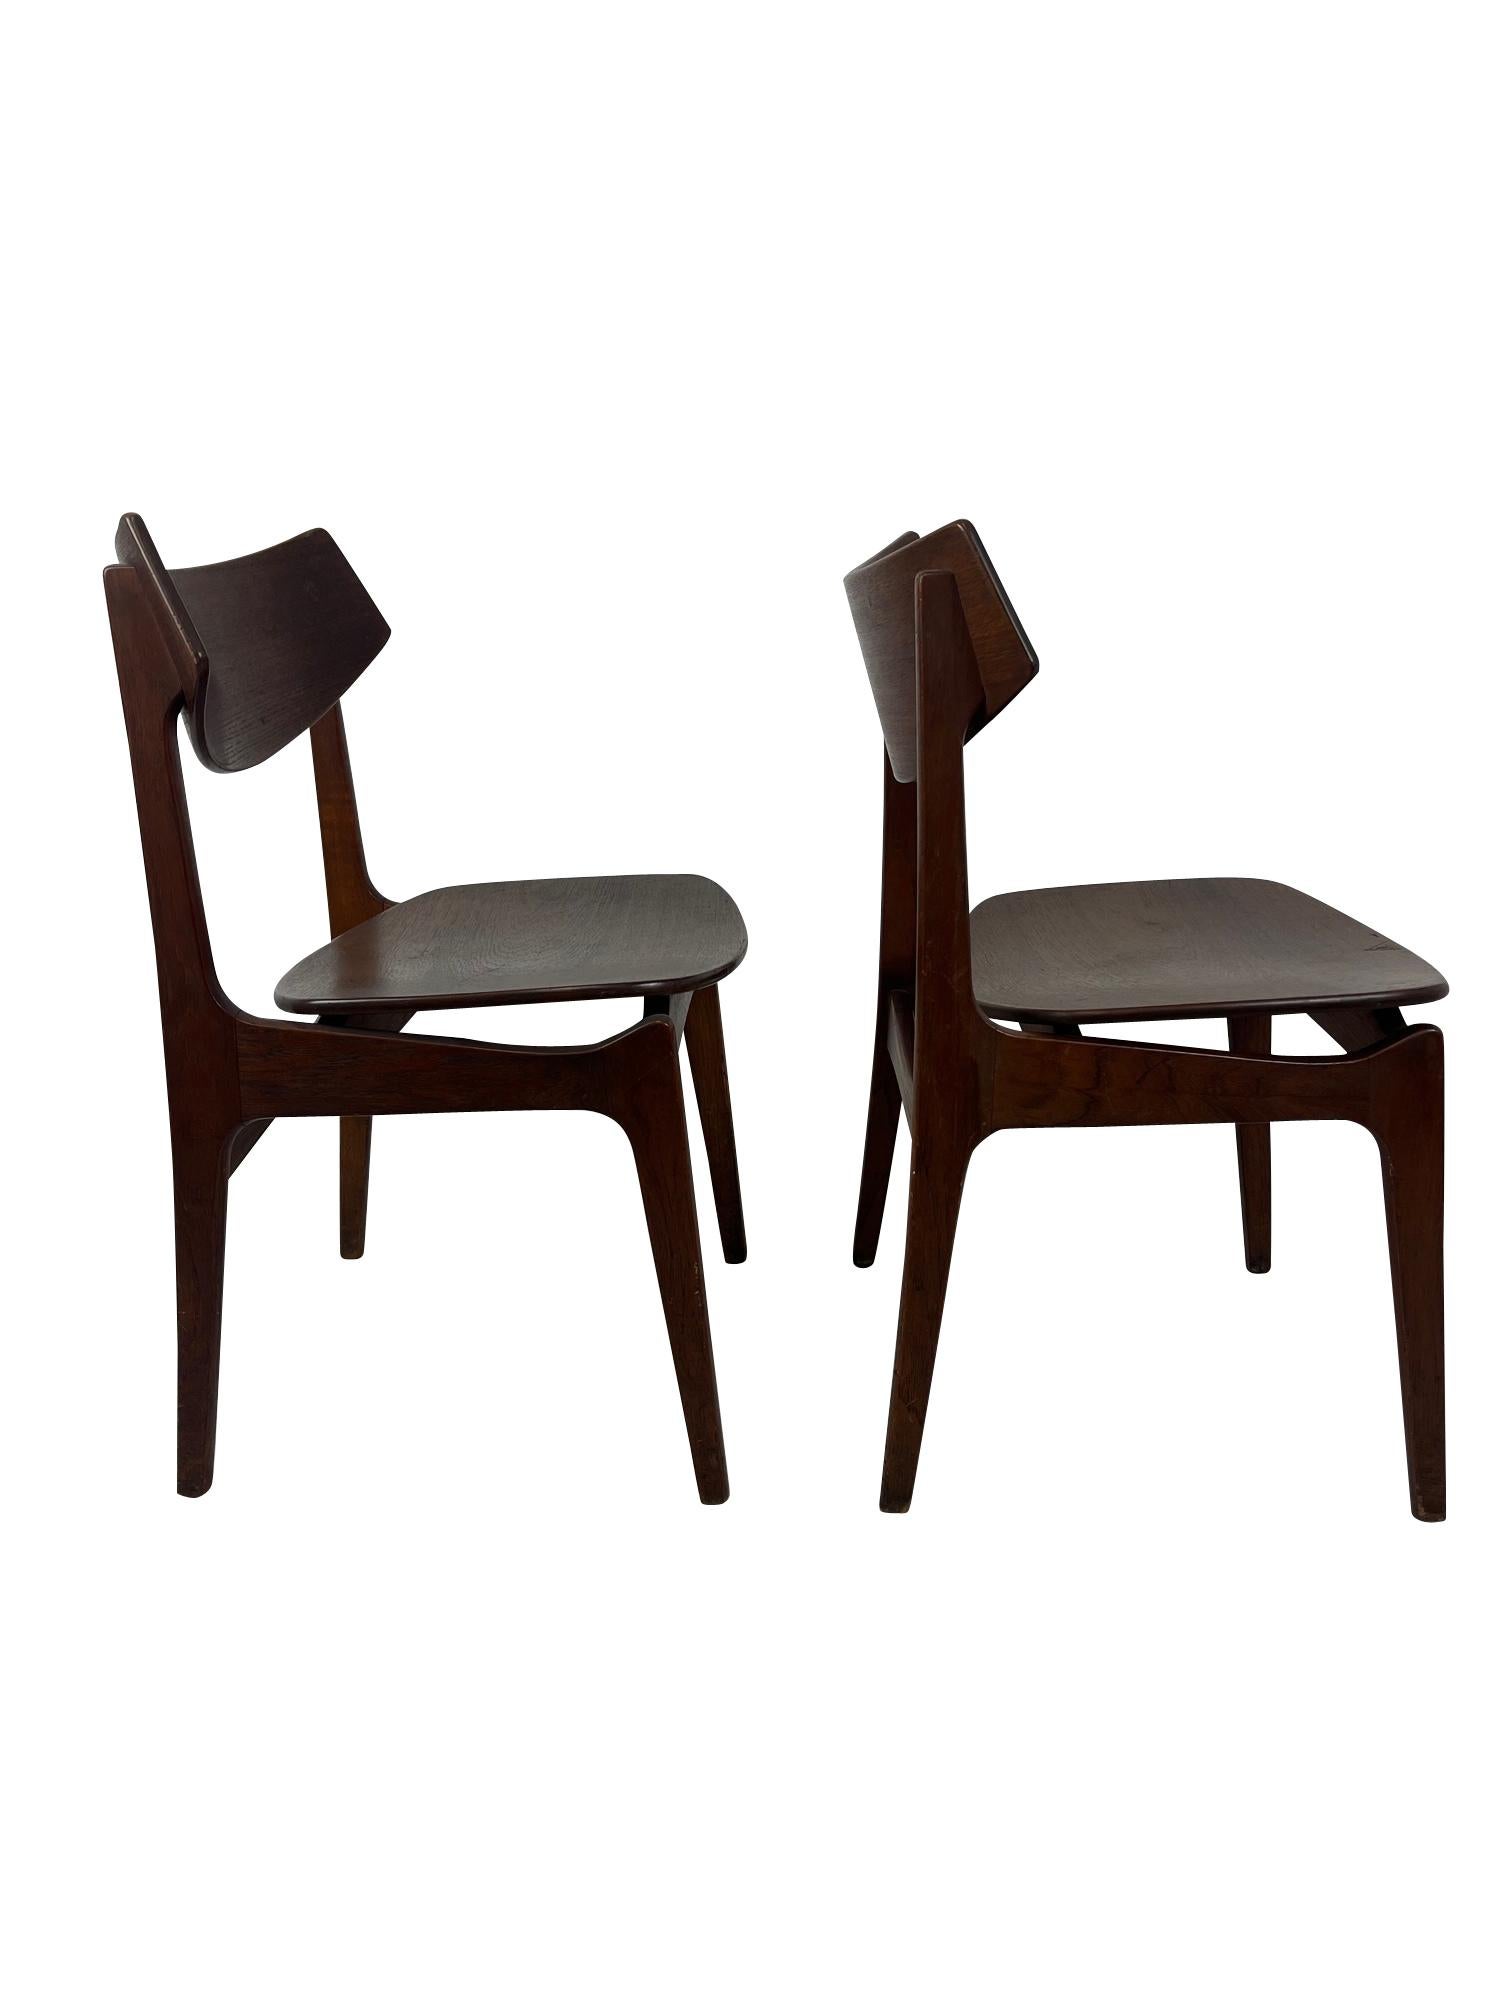 Mid-Century Modern 2 Mid Century Danish Chairs by Funder-Schmidt and Madsen